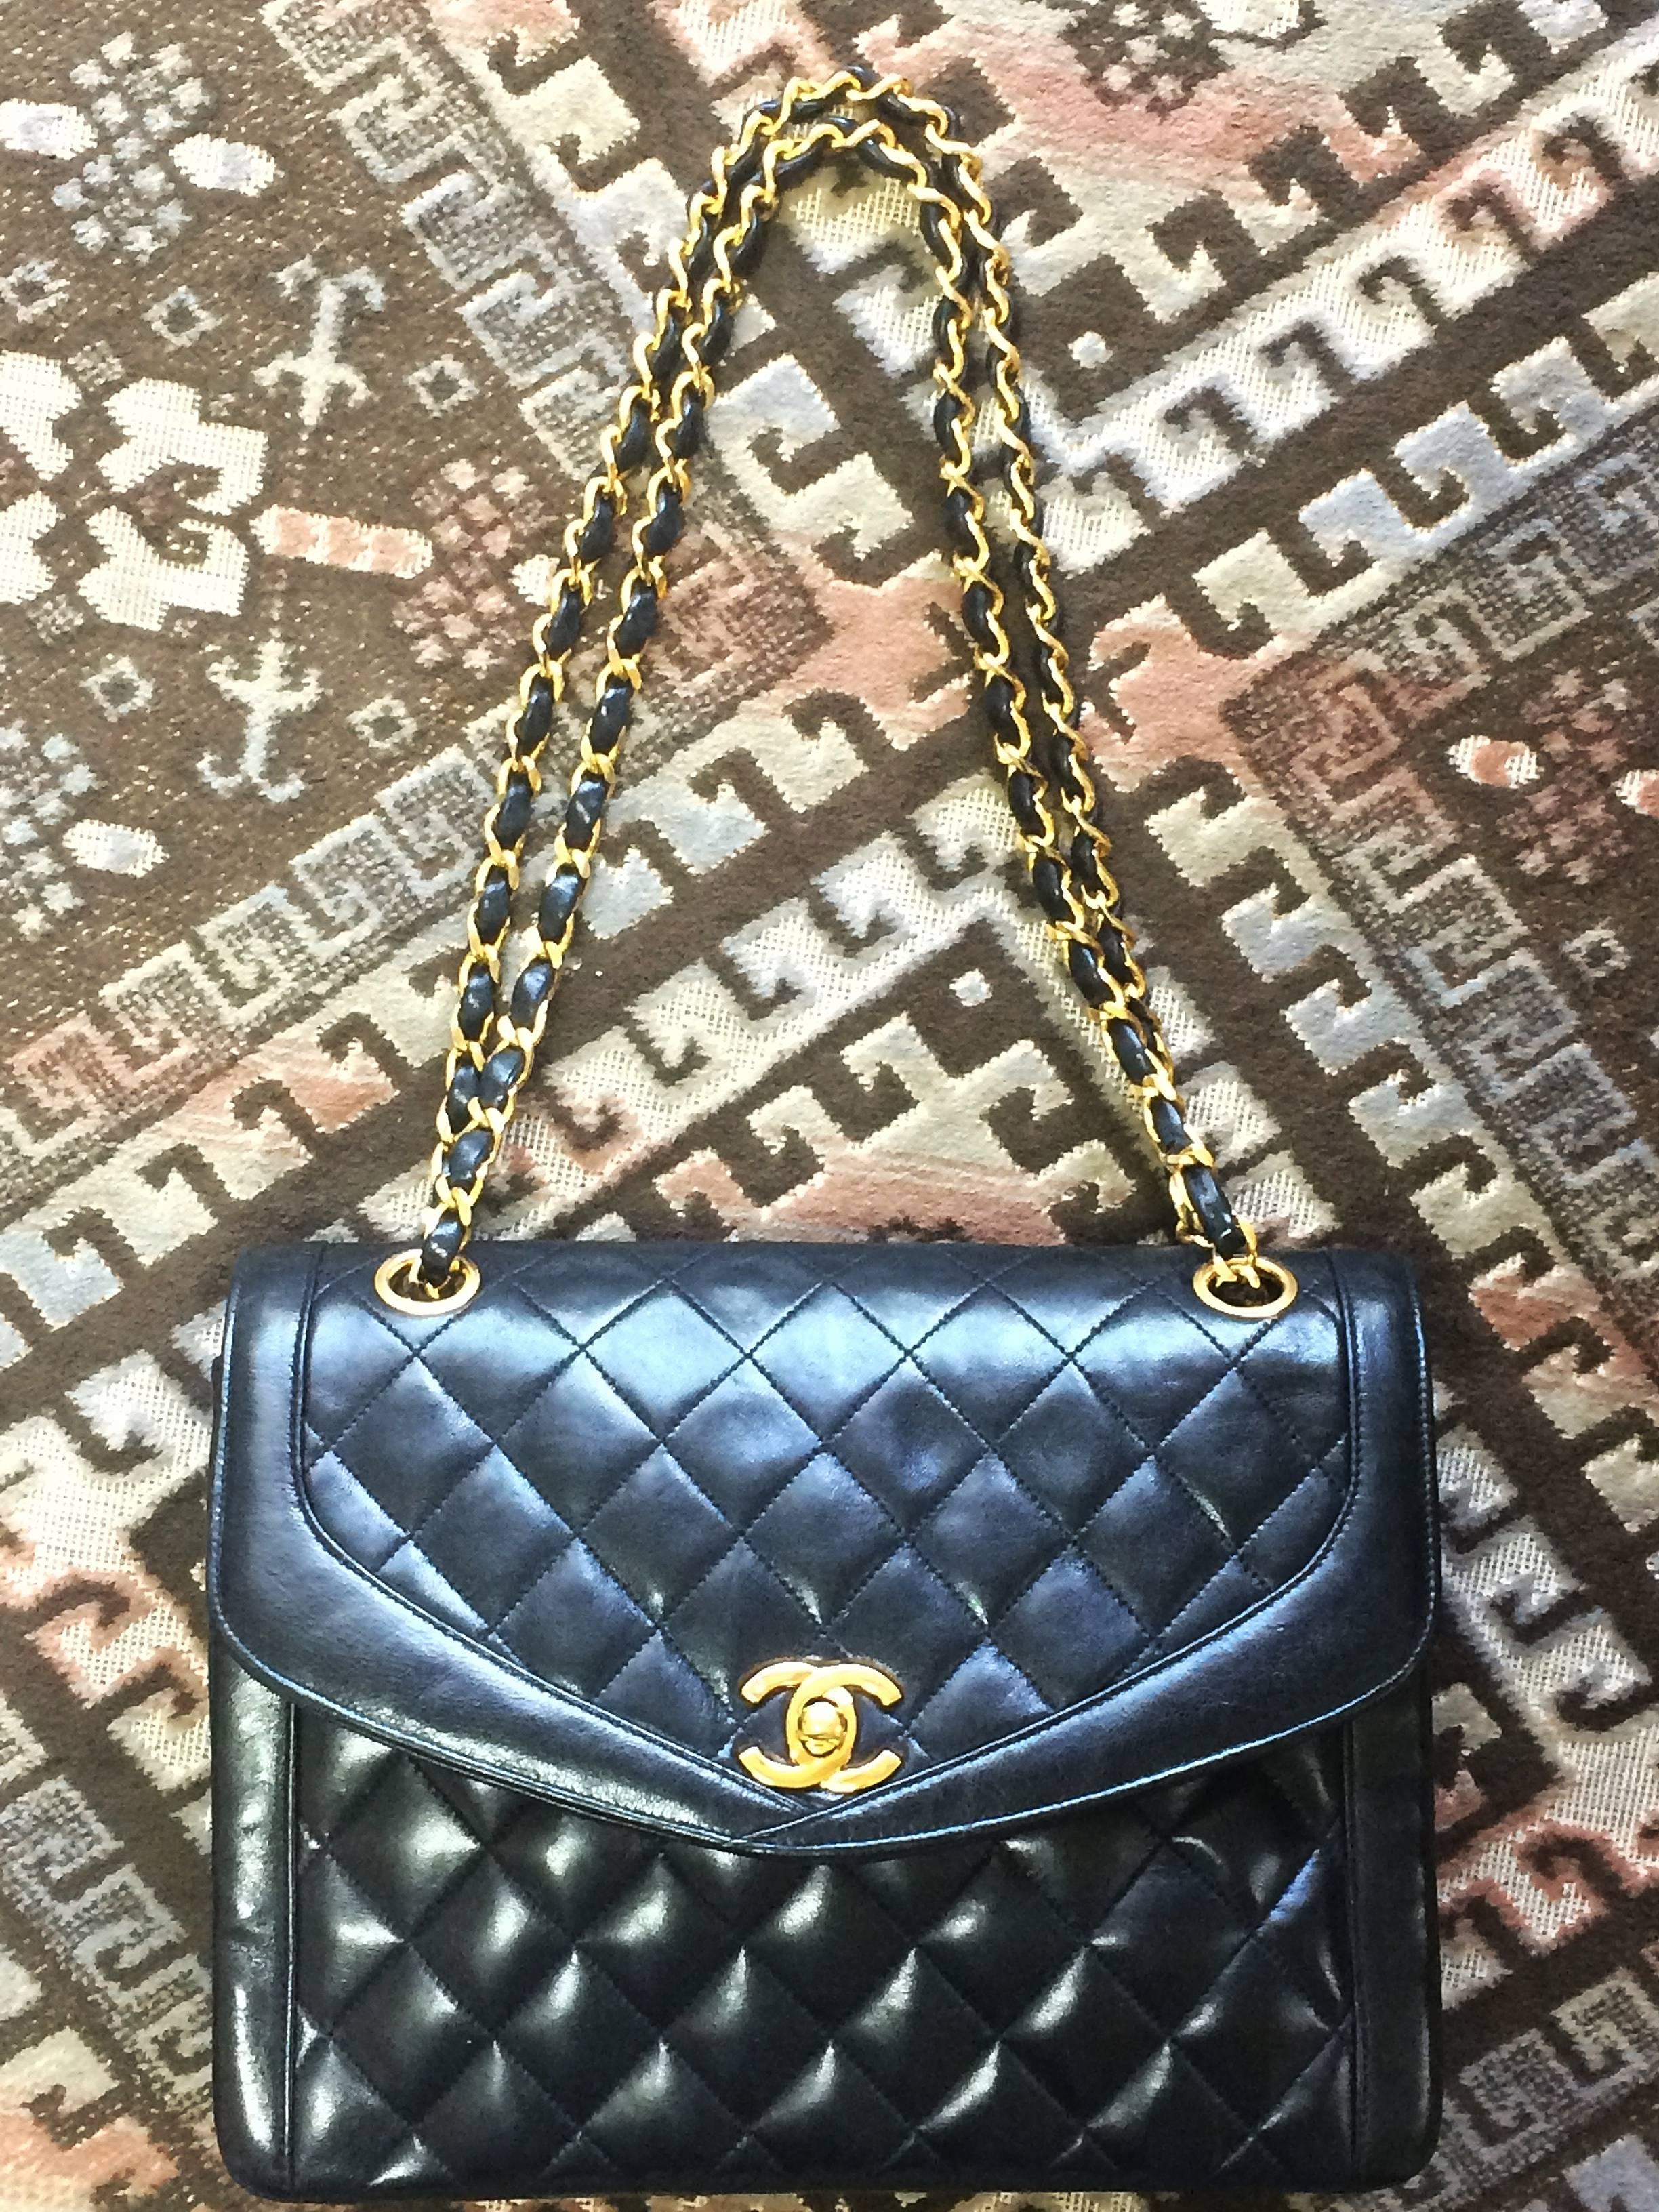 1990s. Vintage Chanel black lambskin chain shoulder 2.55 shoulder bag, pentagon flap.

If you are a vintage CHANEL lover/collector, then this is a must-have piece for your collection!
Introducing a very rare vintage CHANEL black chain shoulder purse